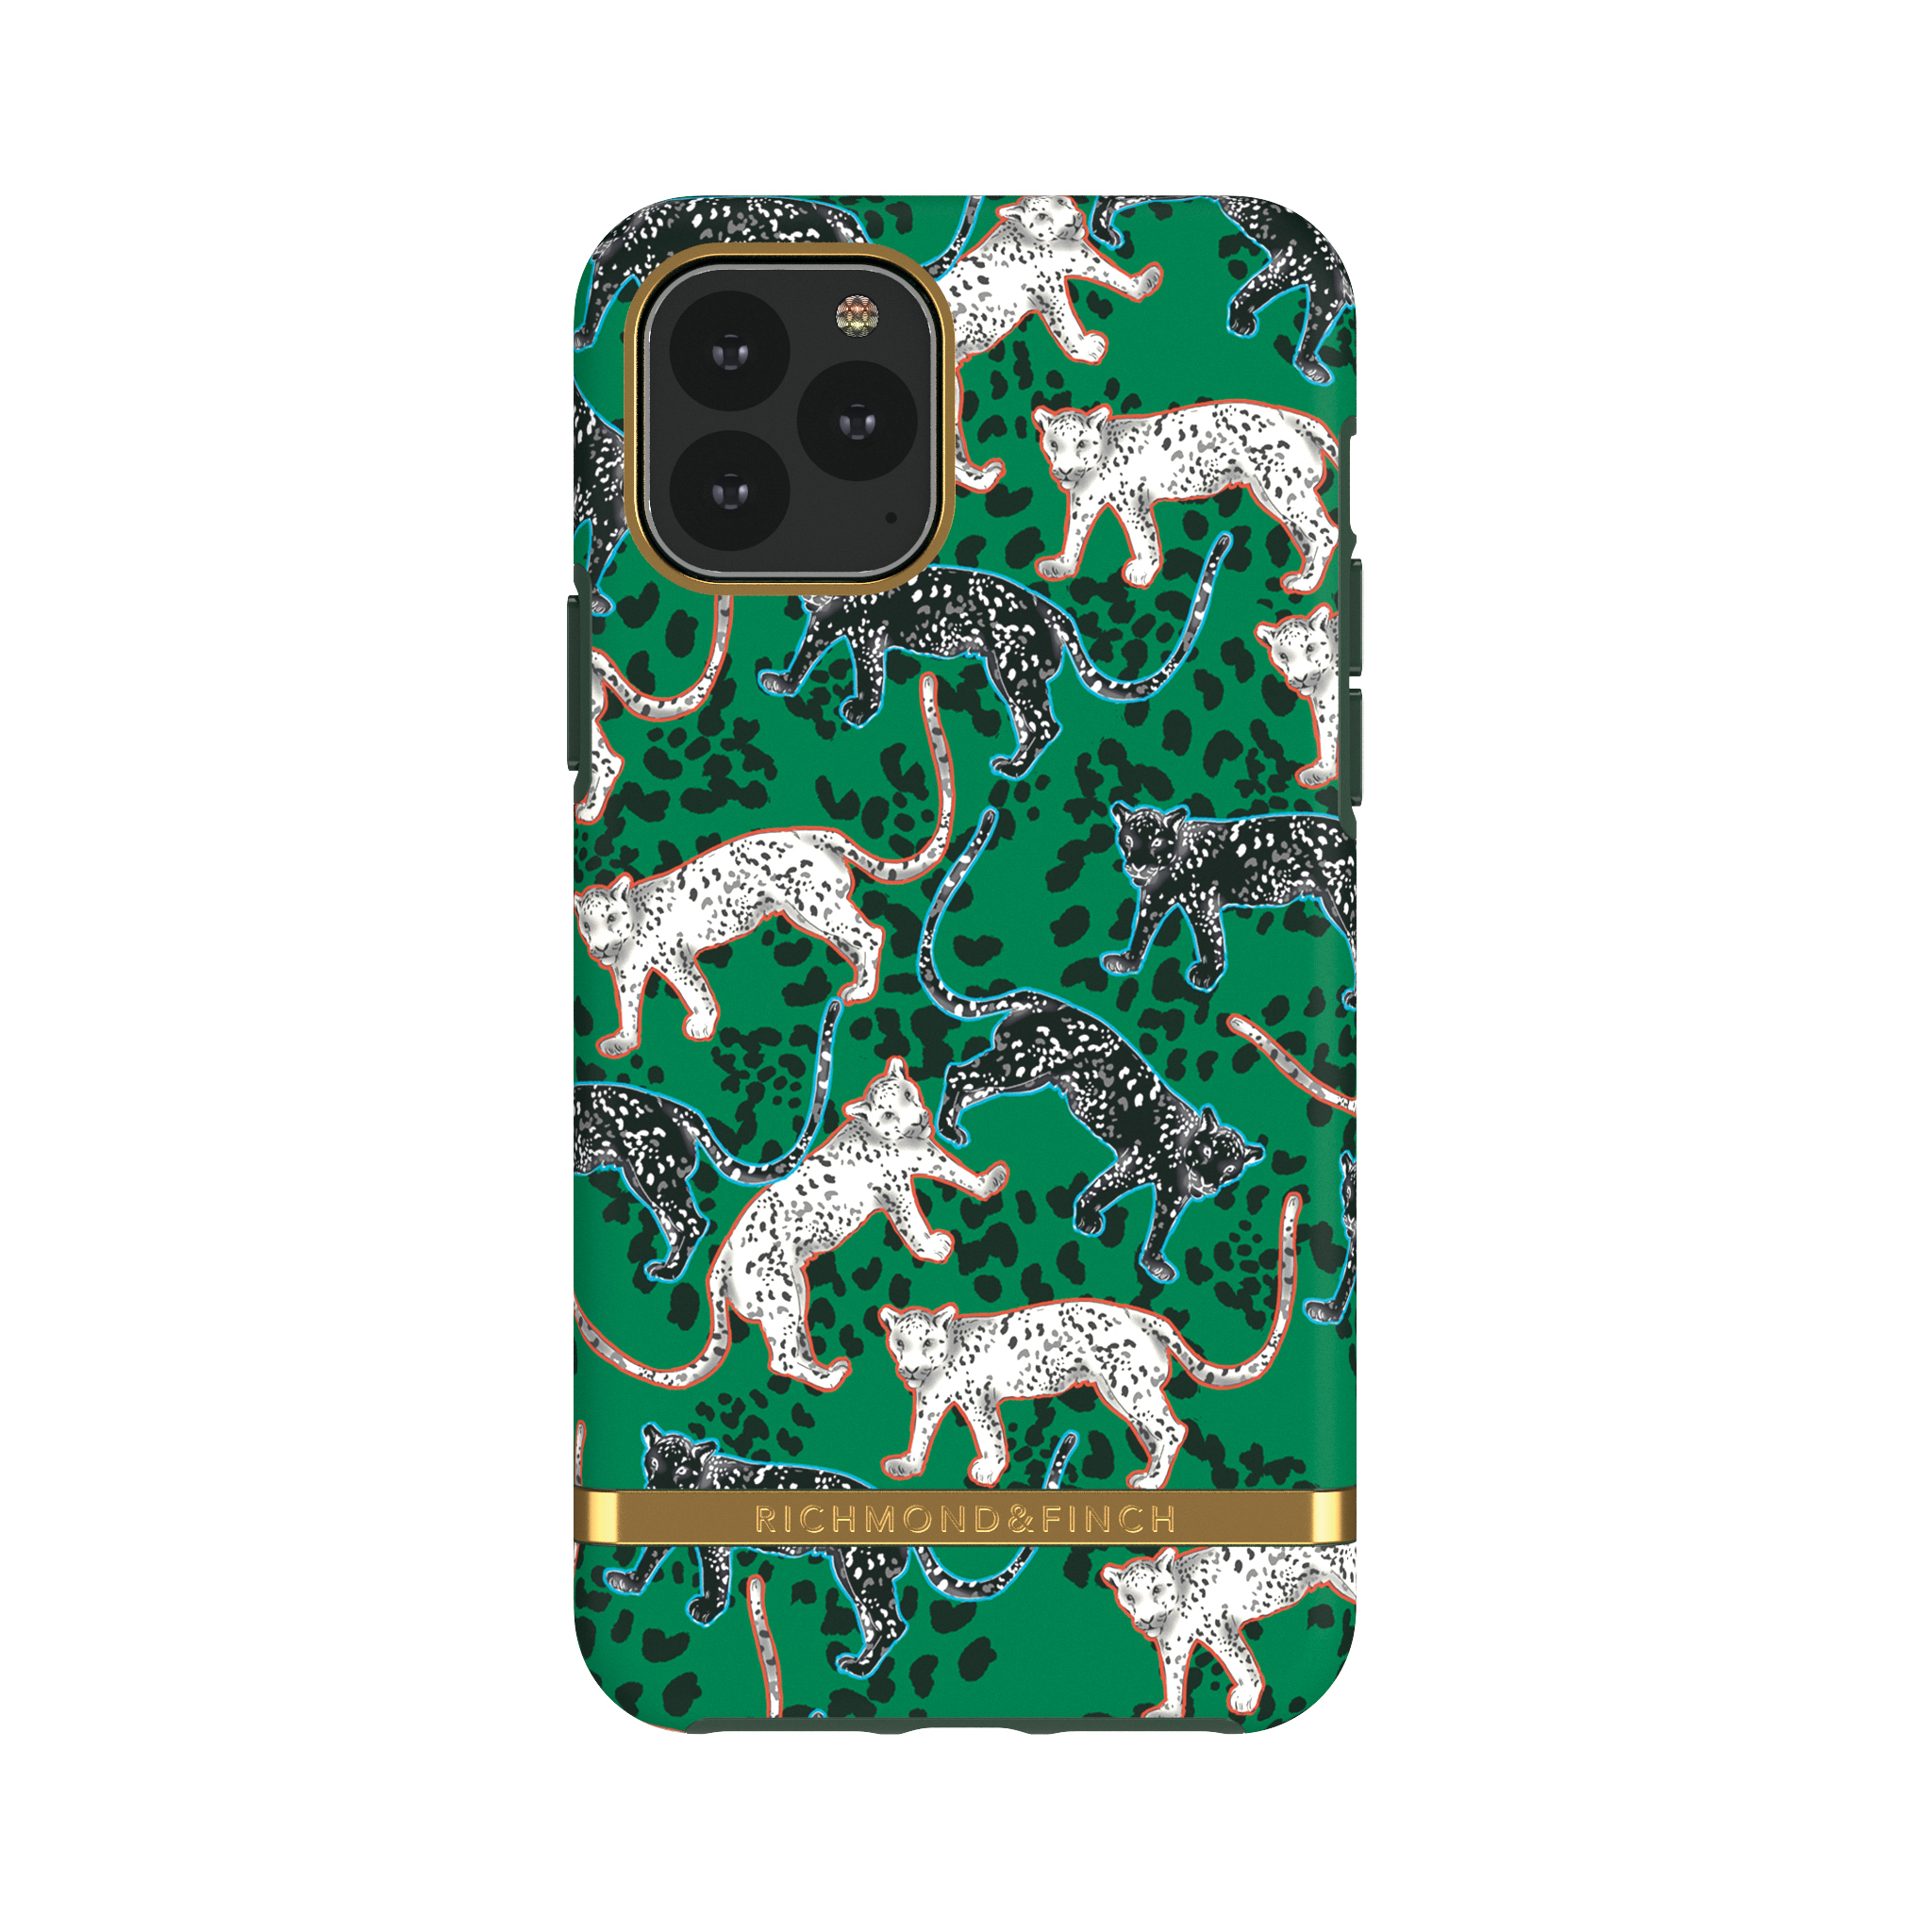 RICHMOND & FINCH Green PRO Pro MAX, IPHONE 11 Backcover, APPLE, Max, iPhone 11 GREEN Leopard